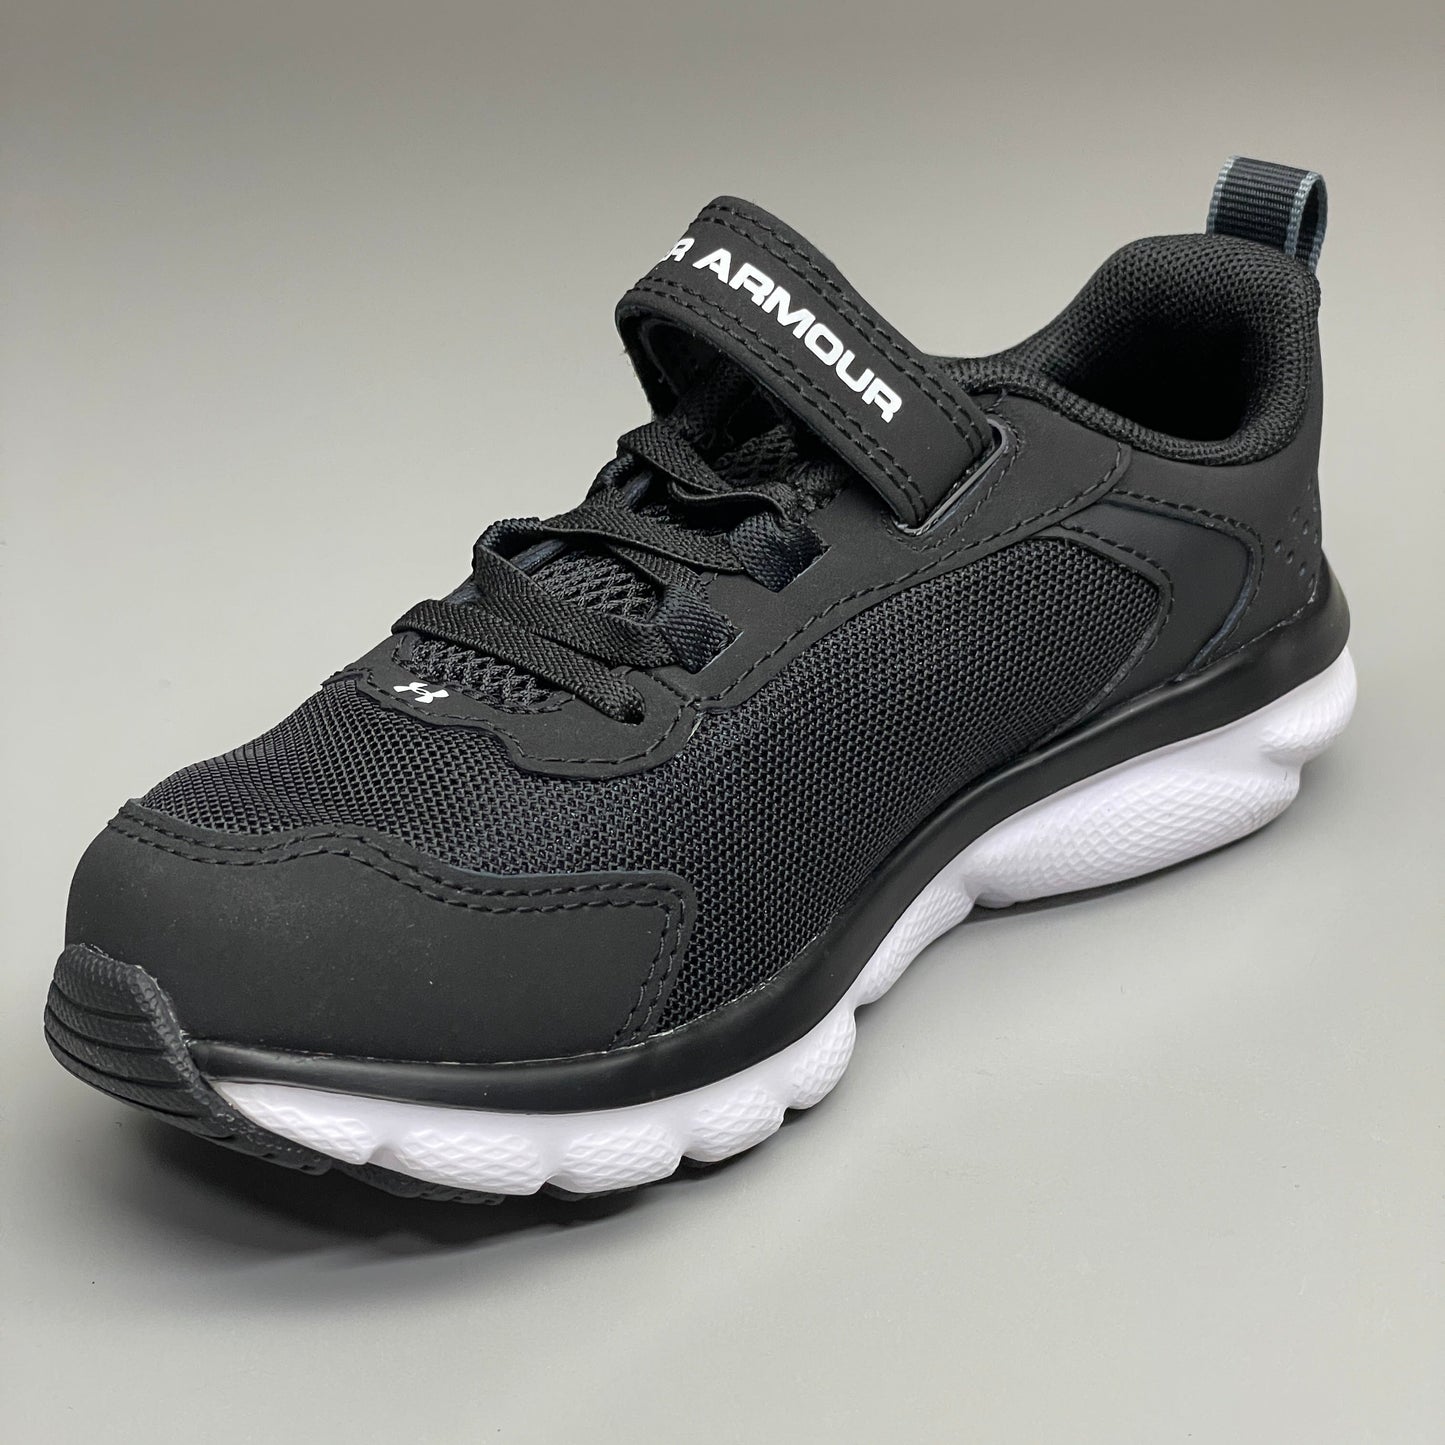 UNDER ARMOUR UA BPS Assert 9 Wide AC 2E Wide Youth Sz 1.5Y Black/White 3024851-001 (New)